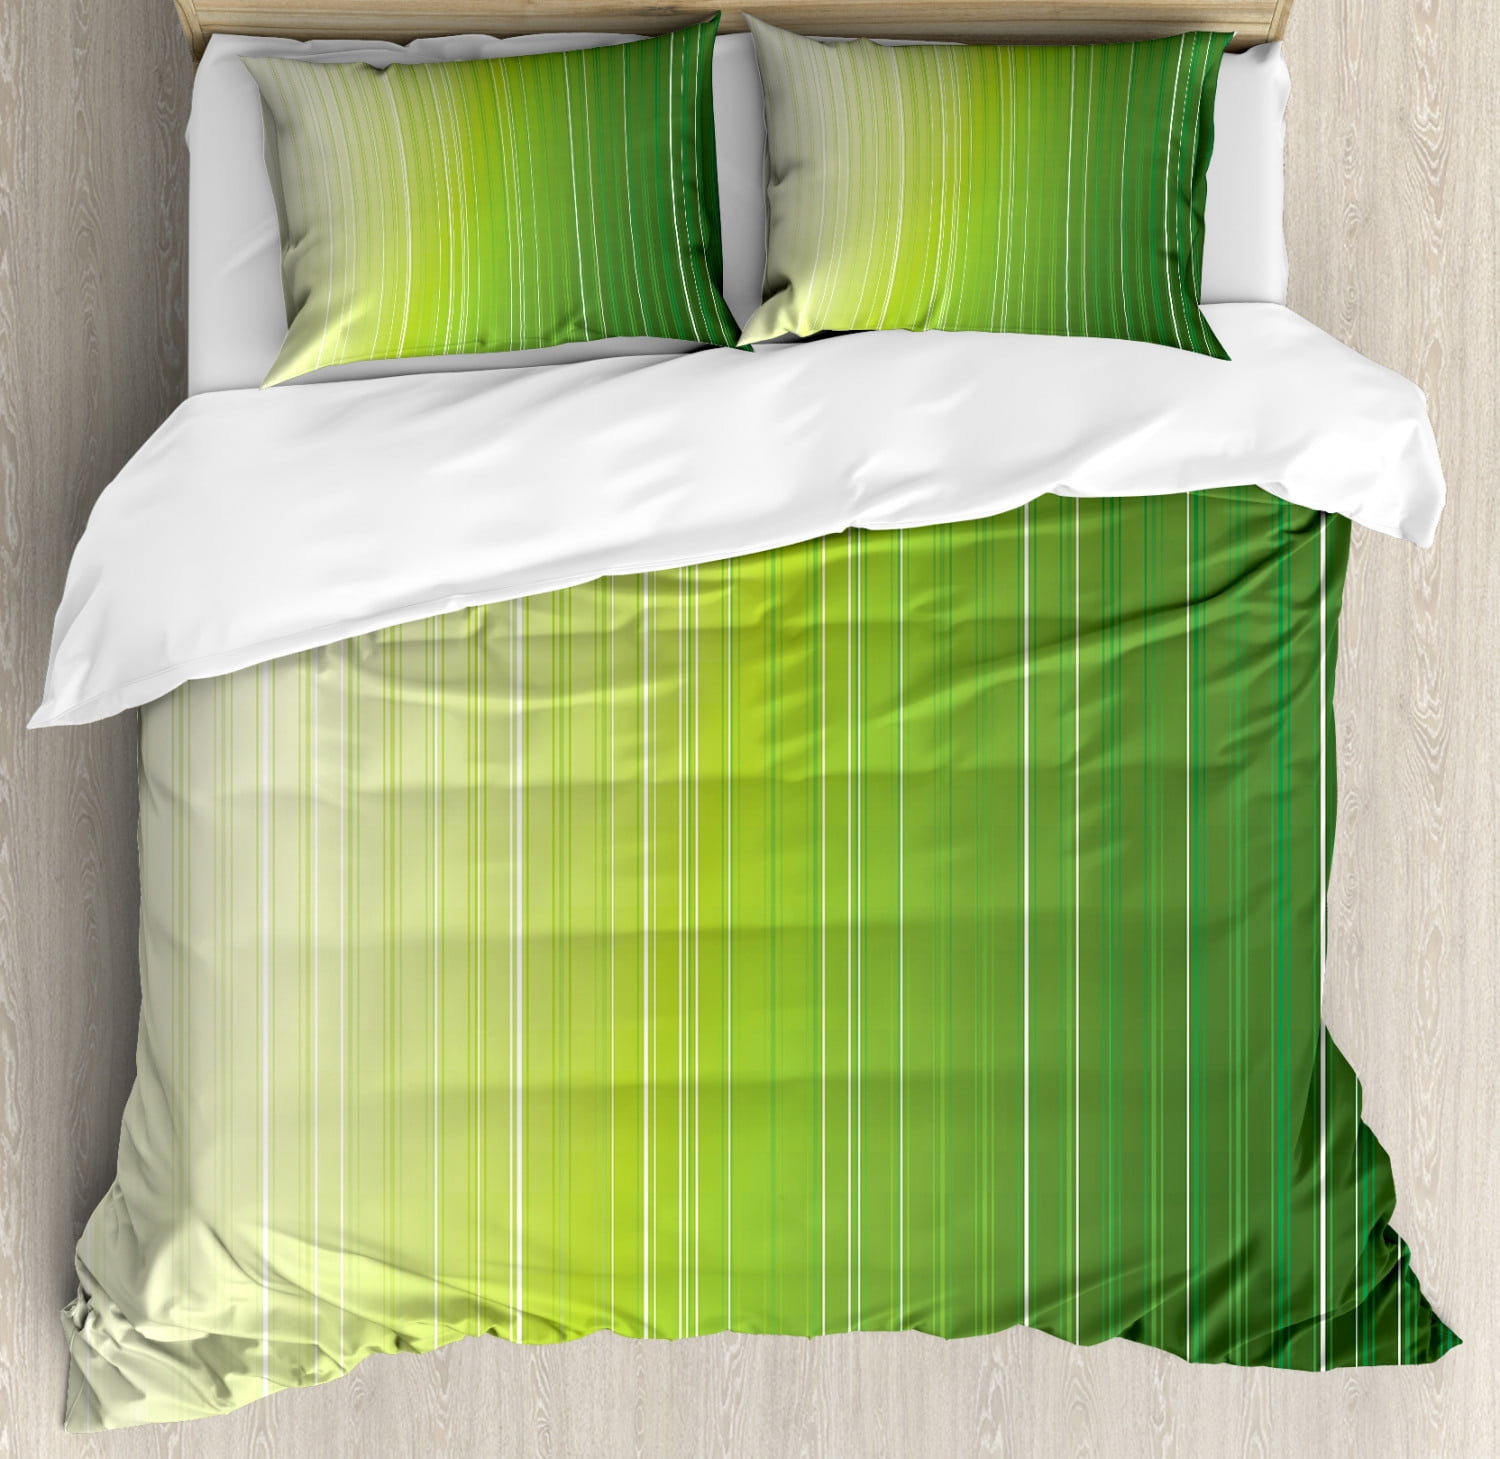 Sage Duvet Cover Set Ombre Style Composition With Color Shades